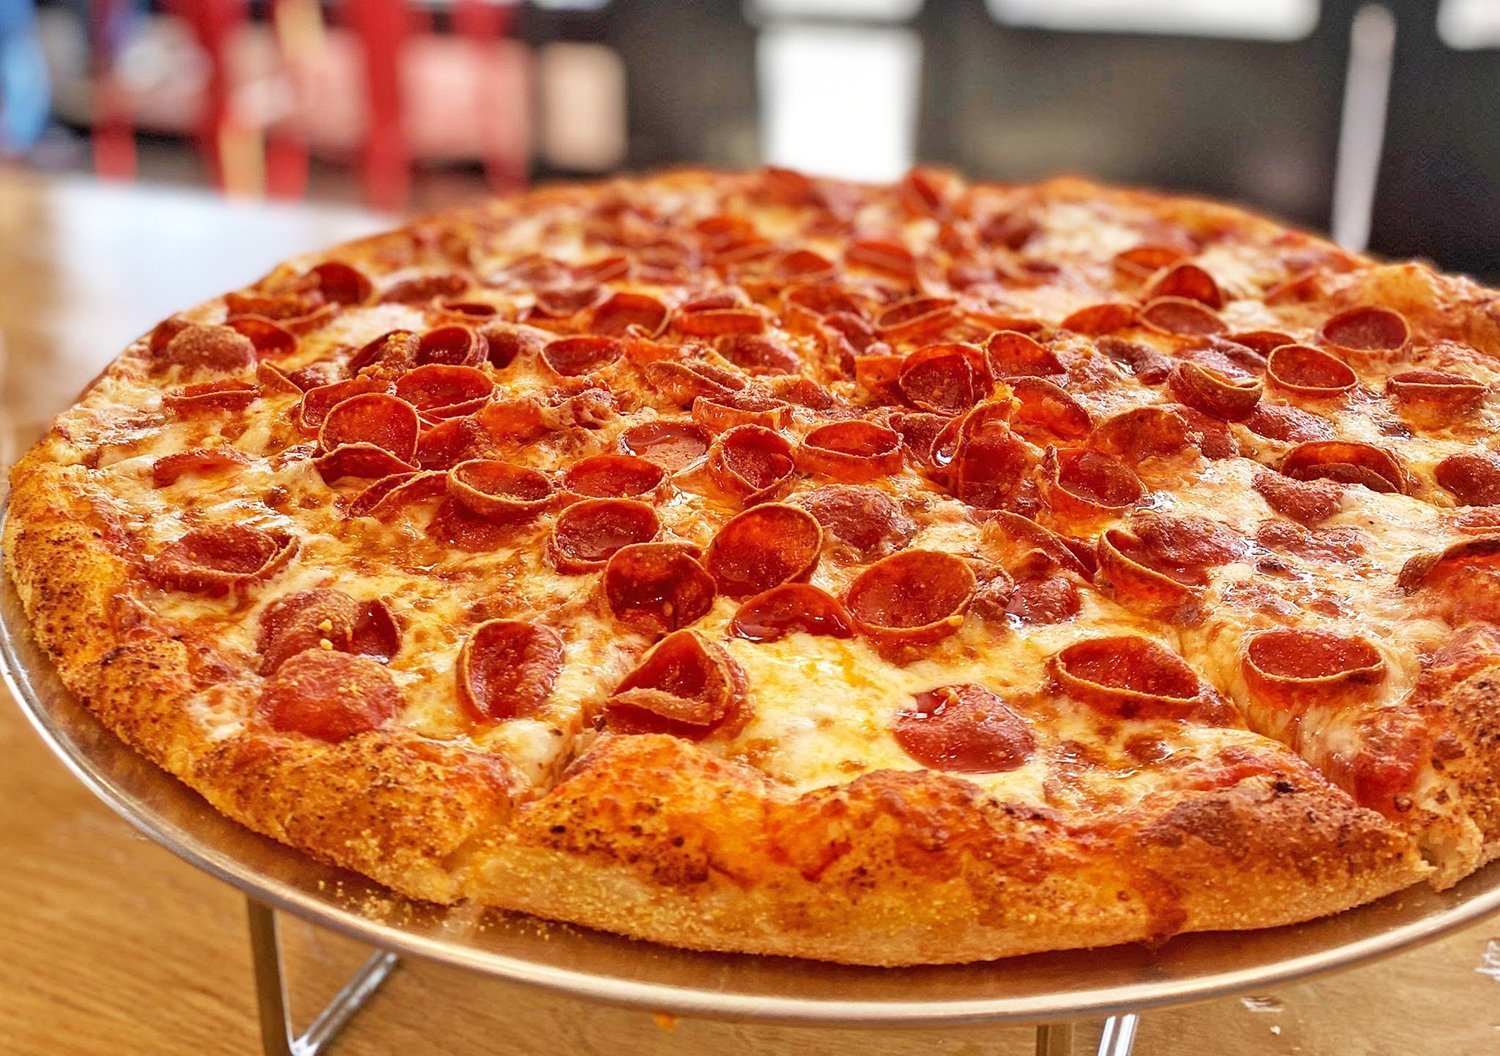 Is Pizza Homogeneous or Heterogeneous? Know the Difference